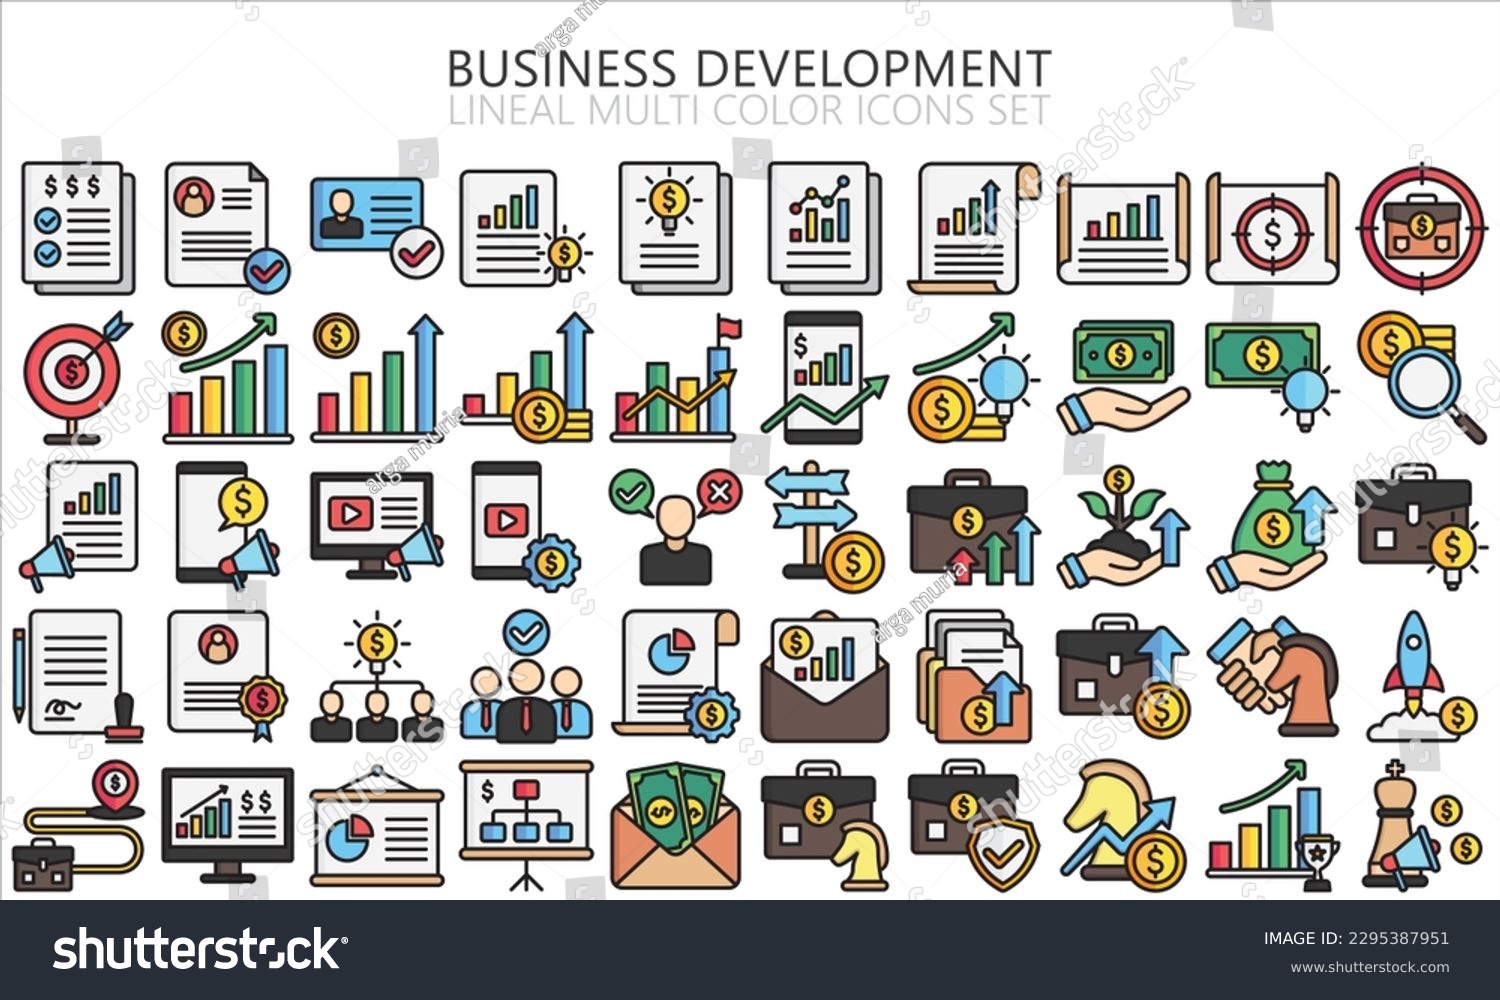 SVG of business development lineal multi color icons. contain analytic, report, chart, management, finance and more. use for modern concept, UI or UX kit, web and app. vector EPS 10 ready convert to SVG. svg